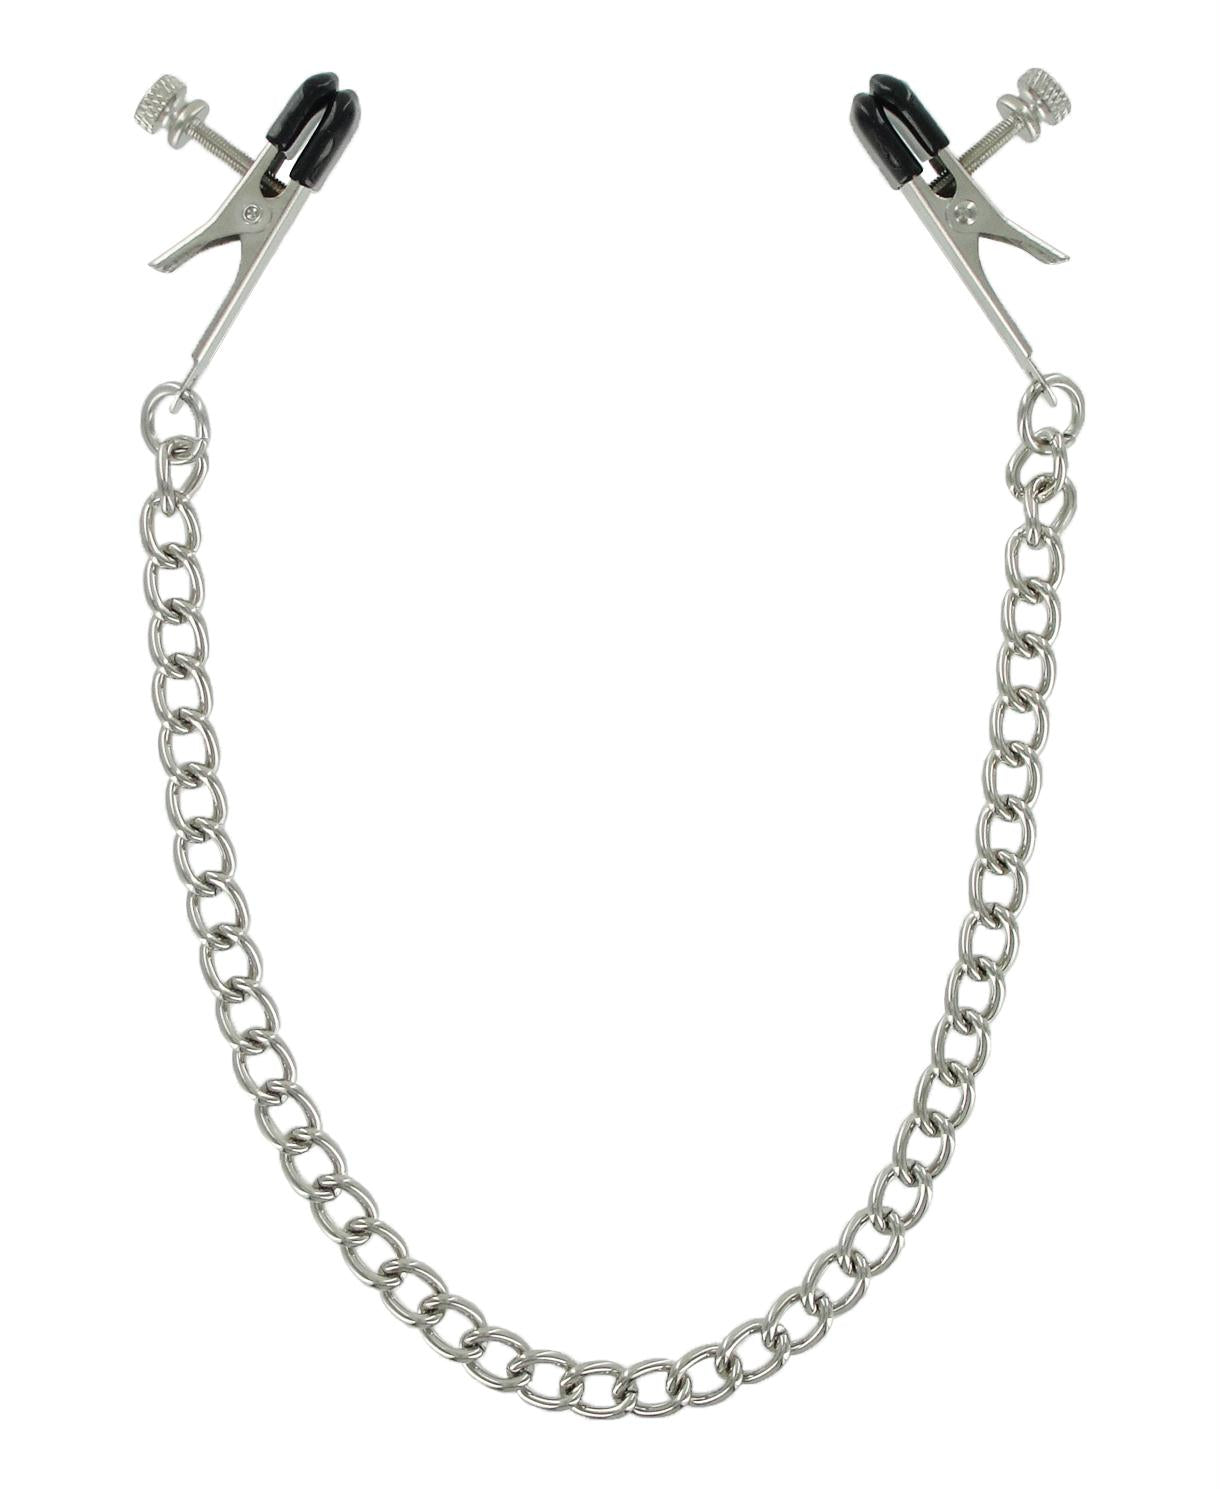 Ox Bull Nose Nipple Clamps - BDSM Gear